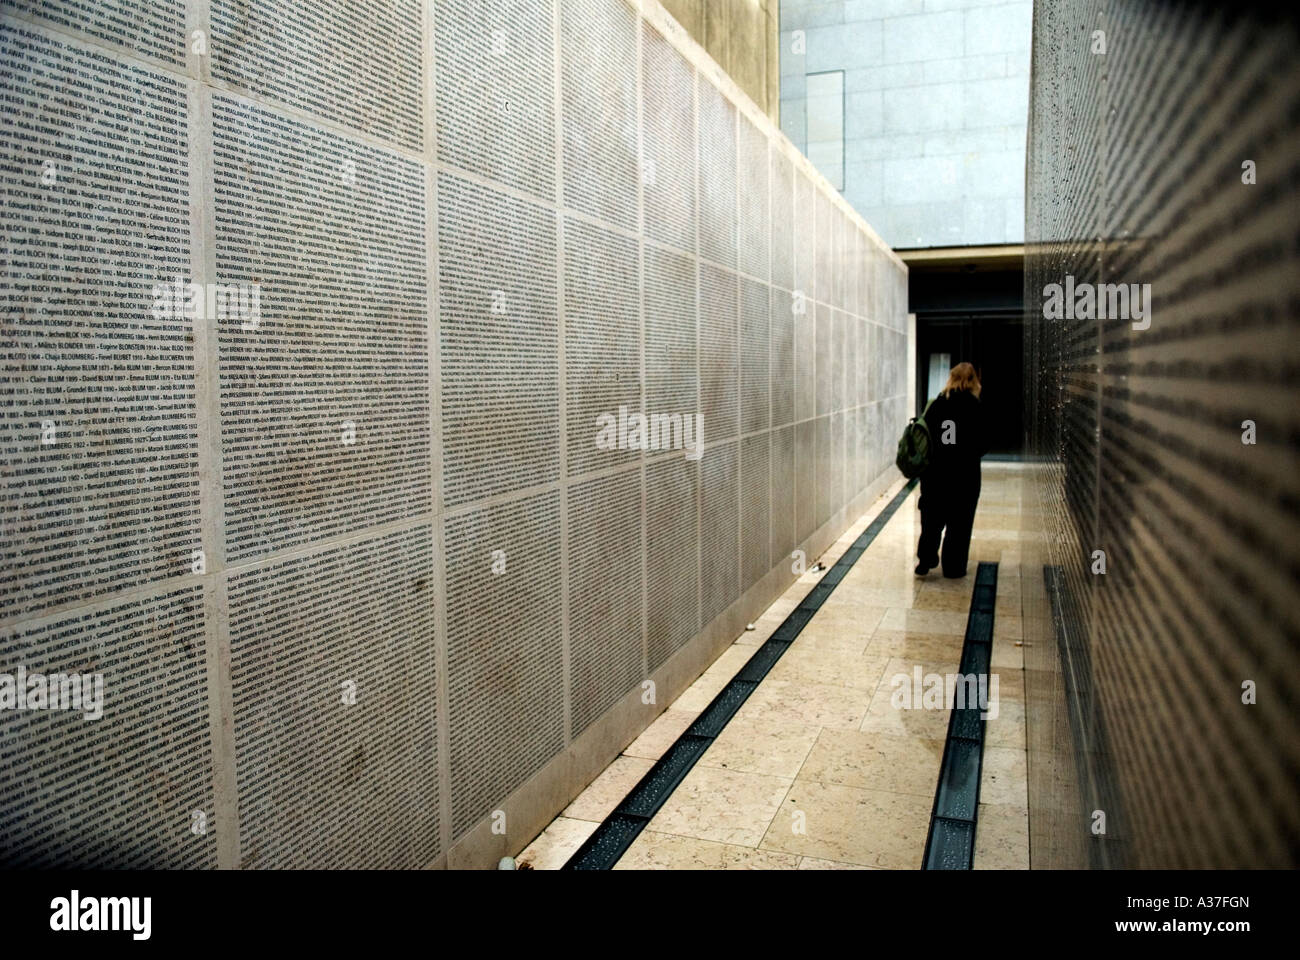 PARIS FRANCE SHOAH MEMORIAL MUSEUM THE WALL OF NAMES OF THE 76 000 JEWS DEPORTED IN WW2 Stock Photo